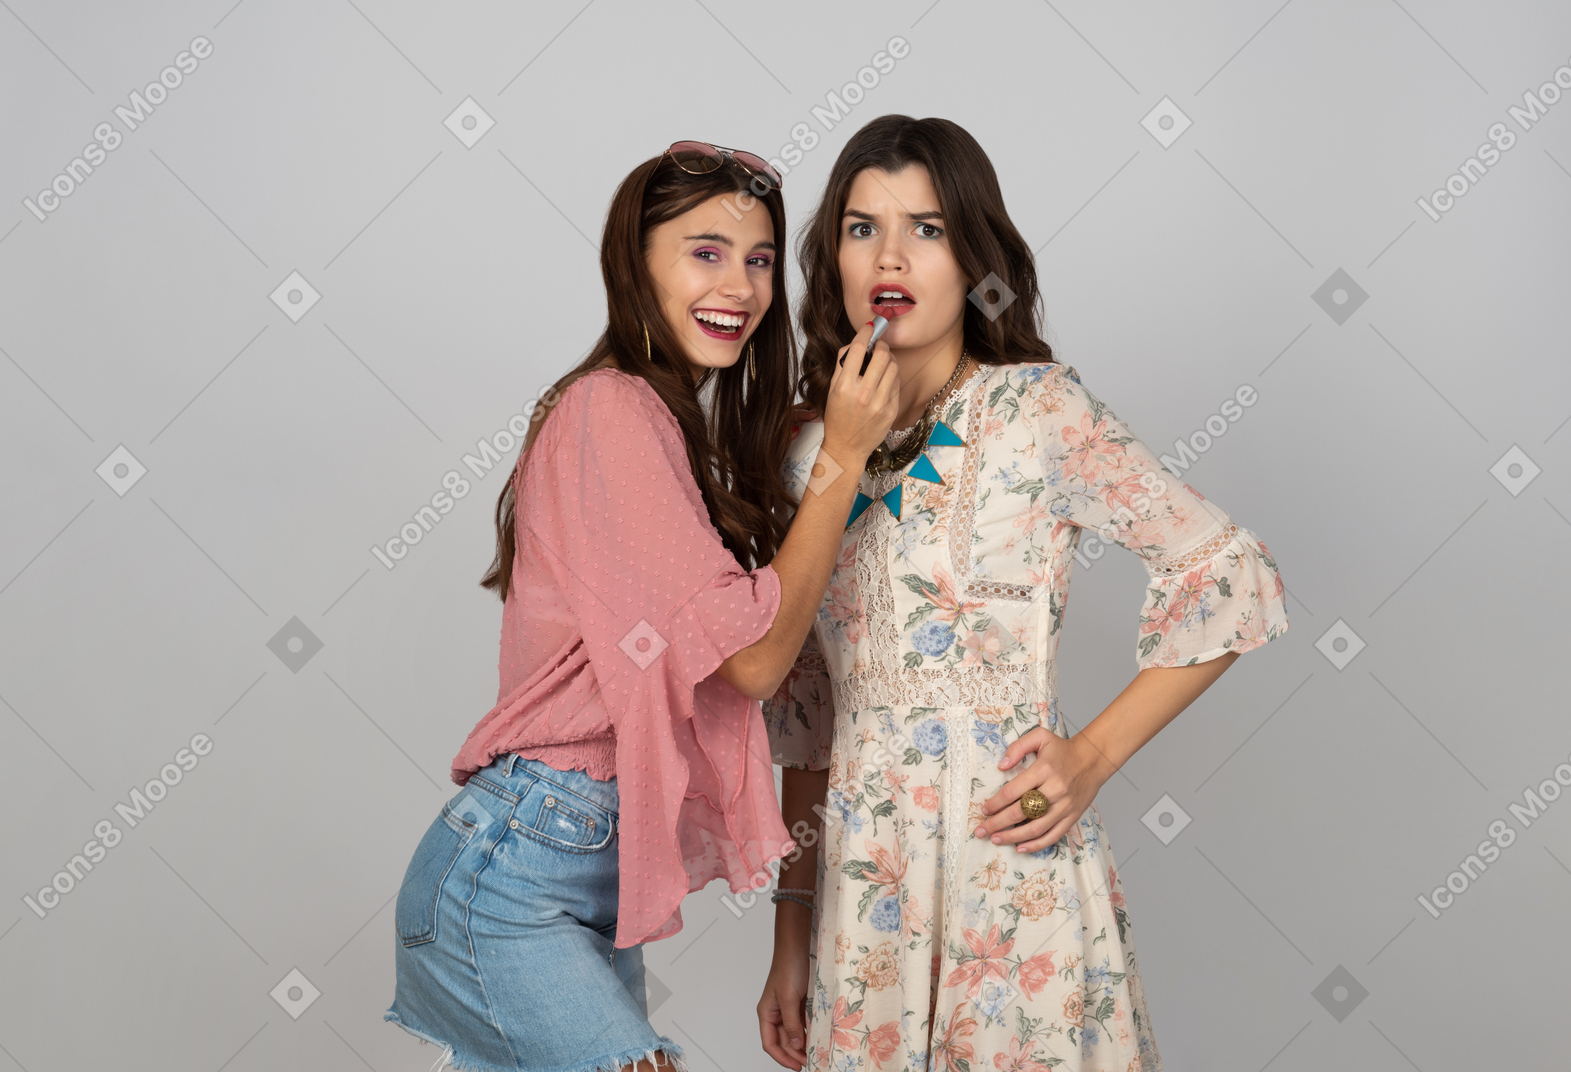 Cheerful young girl putting on lipstick on her friend's lips